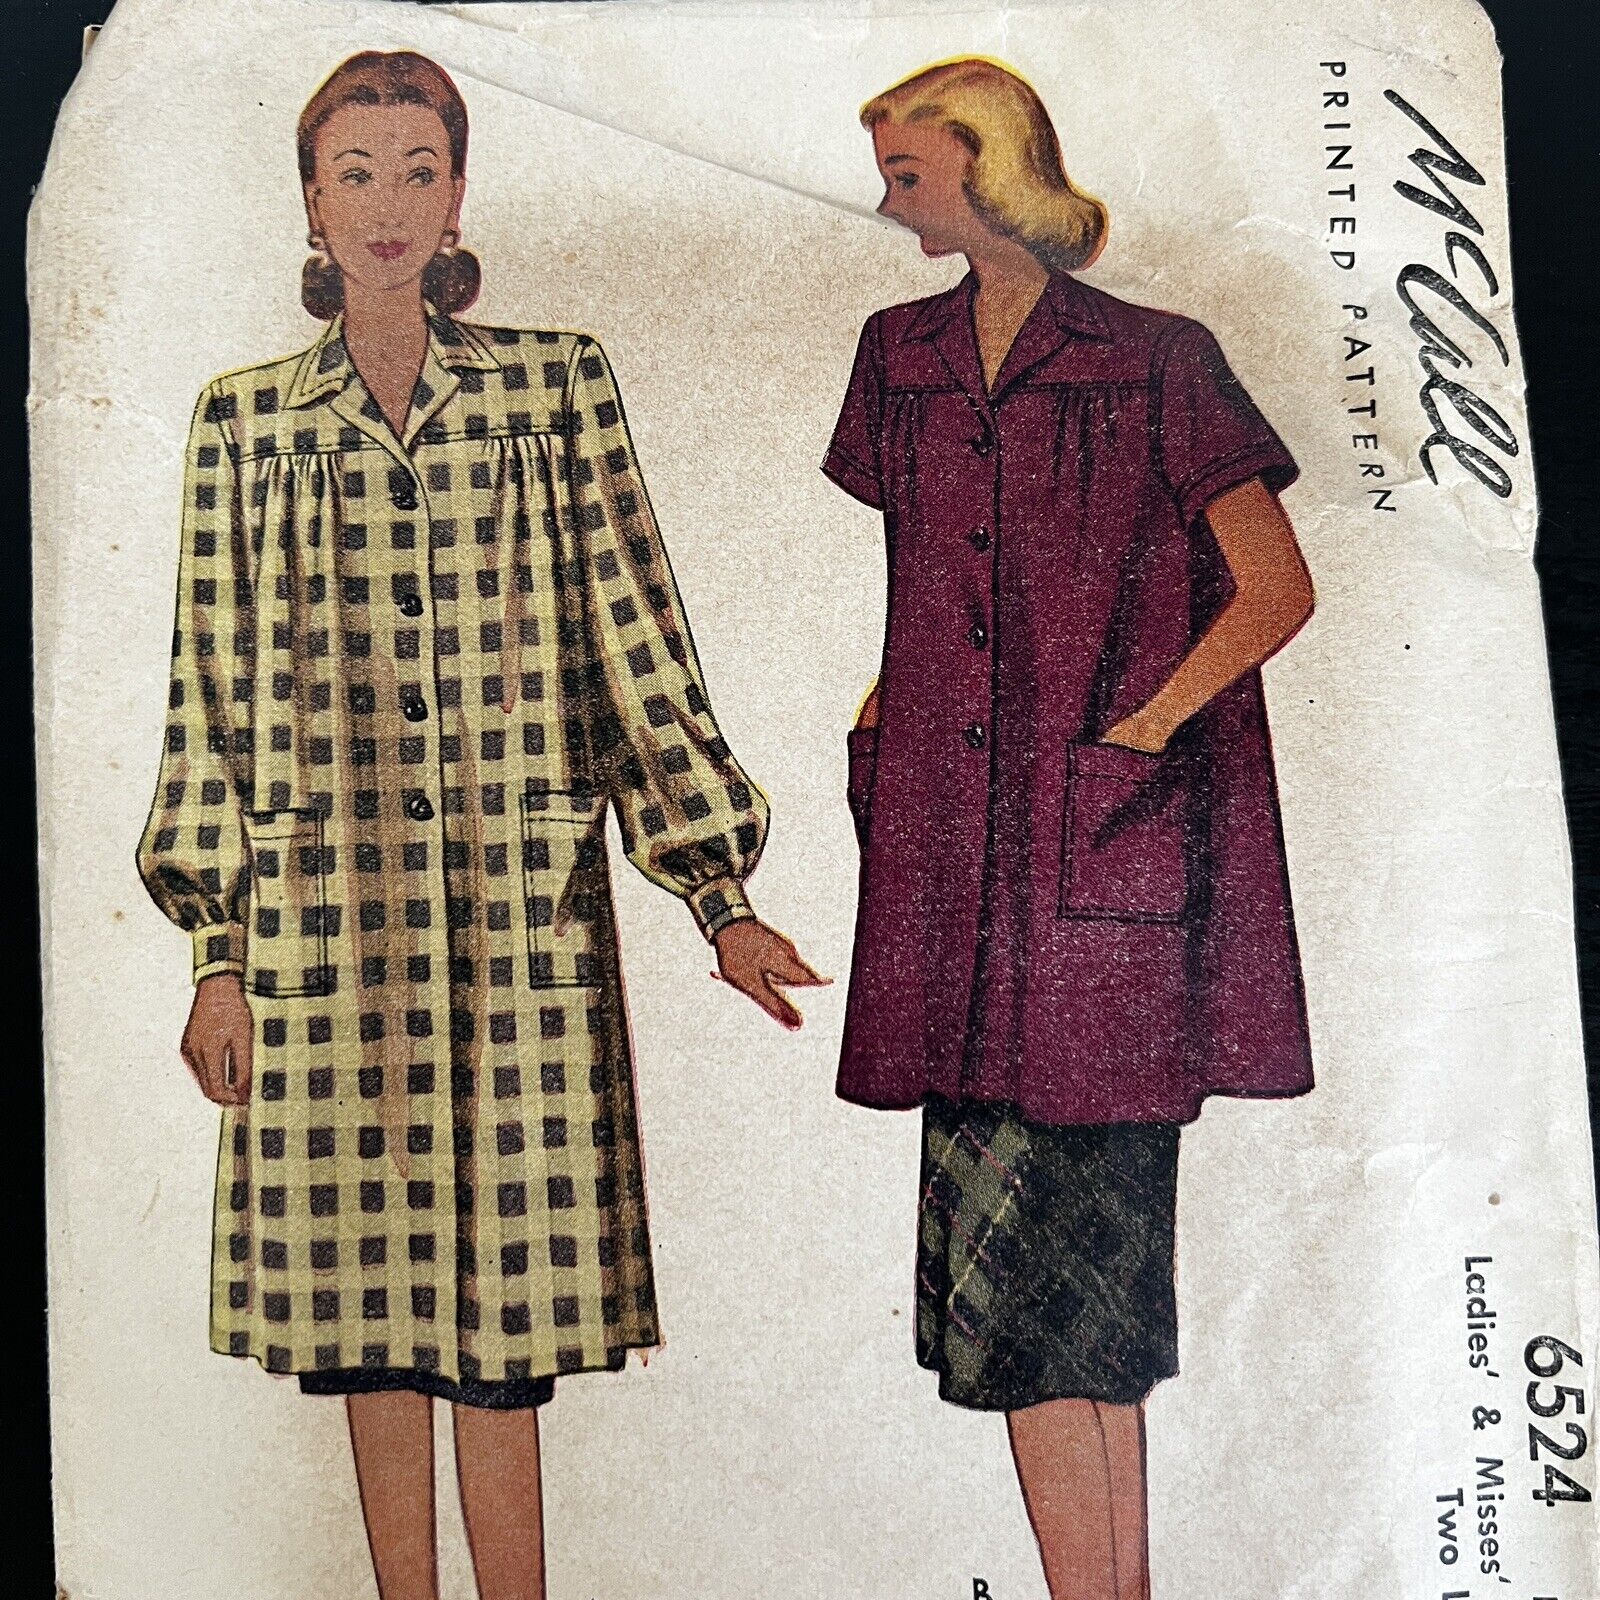 Vintage 1940s McCalls 6524 Collared Button Smock Top Dress Sewing Pattern 38 40